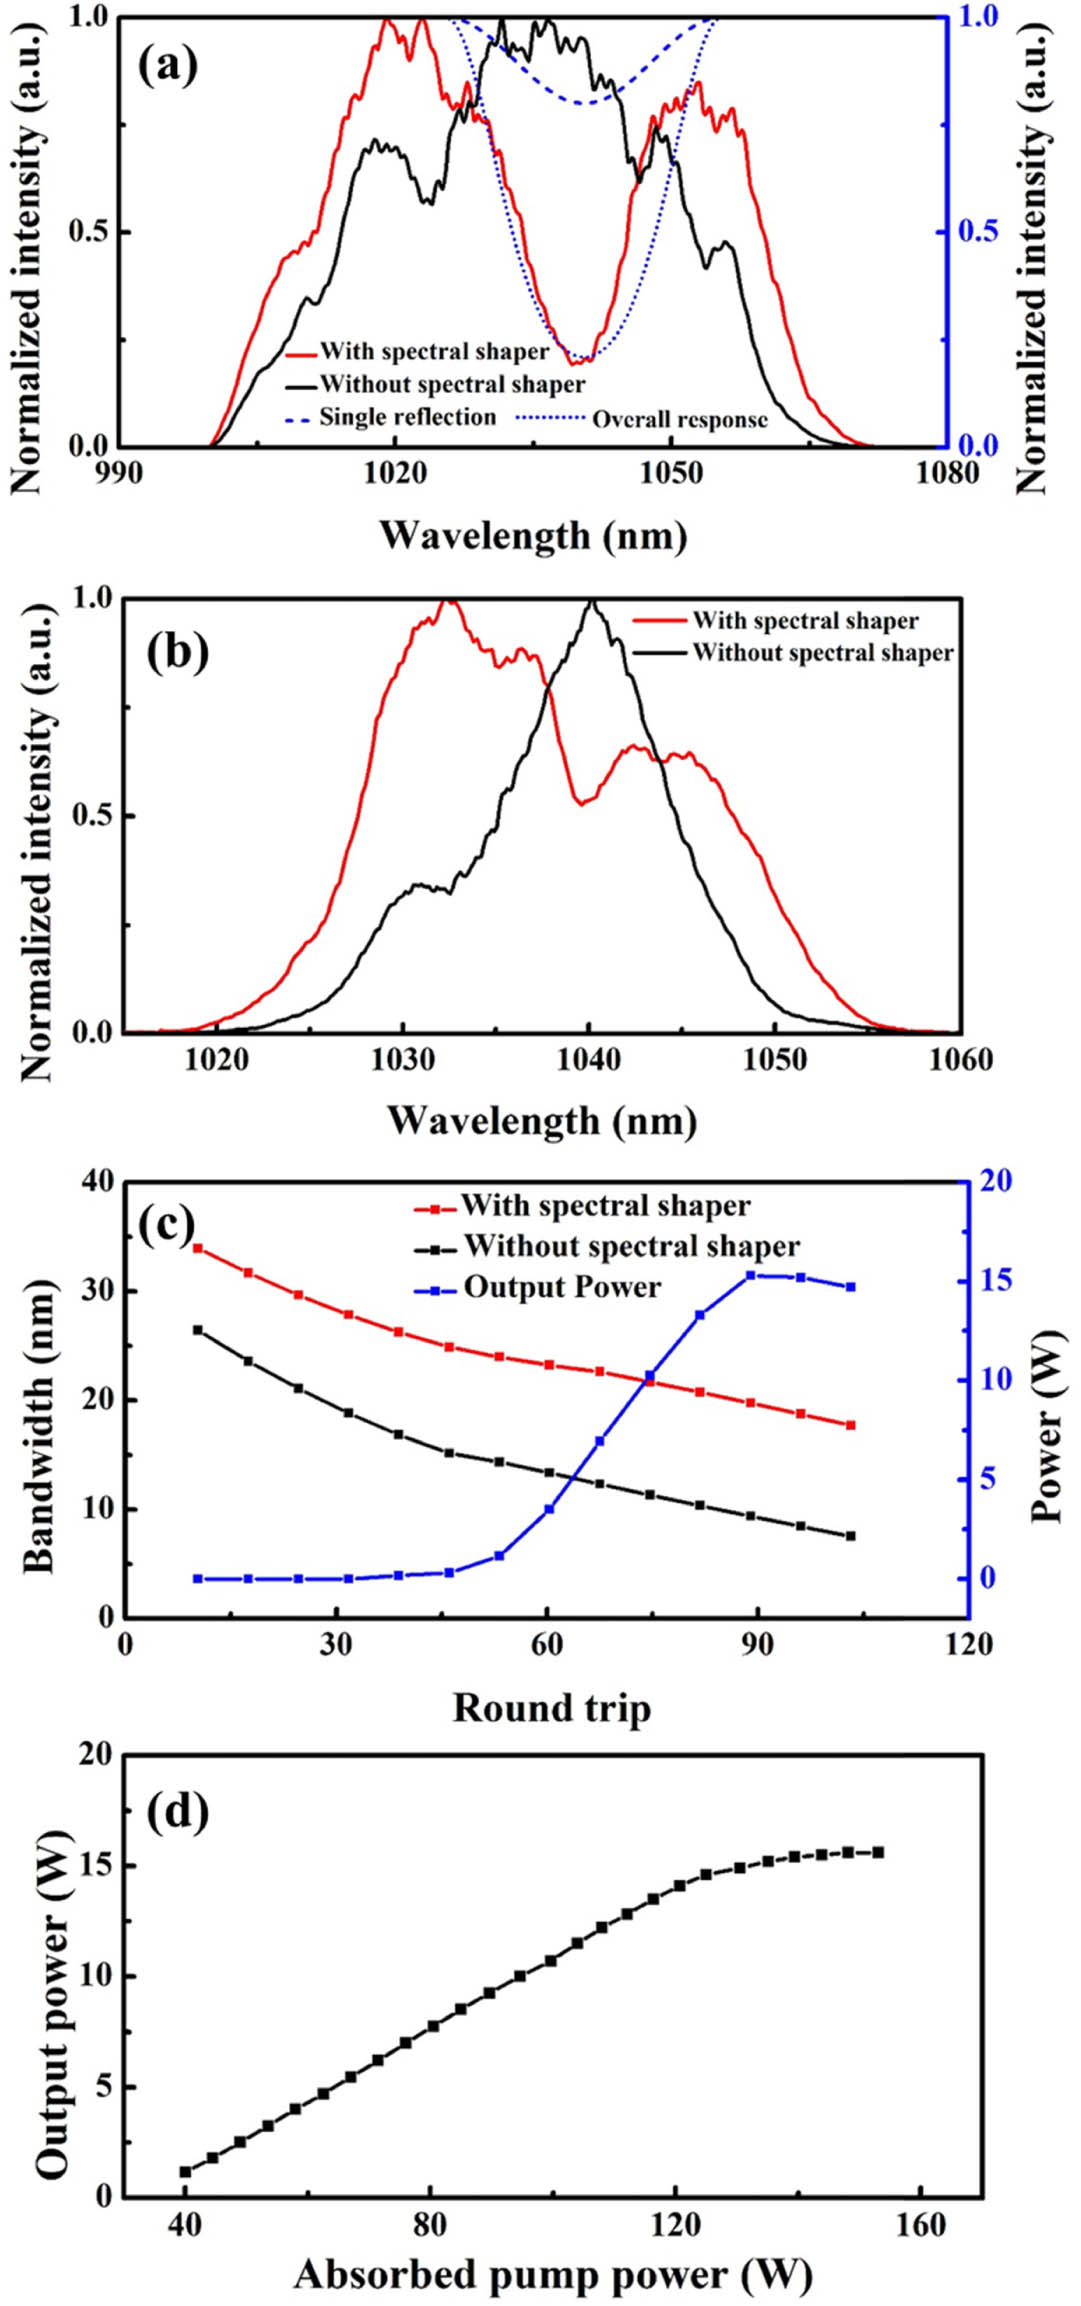 (a) Comparison of the seed spectrum with (red) and without (black) the spectral shaper. The single reflection (blush dash) and overall response (blue dot) of the spectral shaper as a function of the wavelength are also included. (b) Comparison of the amplified spectrum with (red) and without (black) spectral shaping. The spectra correspond to the output power of ∼15.5 W with 90 round trips. (c) The amplified spectral bandwidth with (red) and without (black) the spectral shaper, and the output power (blue) as a function of the round trips in the regenerative amplifier, with the absorbed pump power of 150 W. (d) The amplified output power in the regenerative amplifier as a function of the absorbed pump power with 90 round trips.